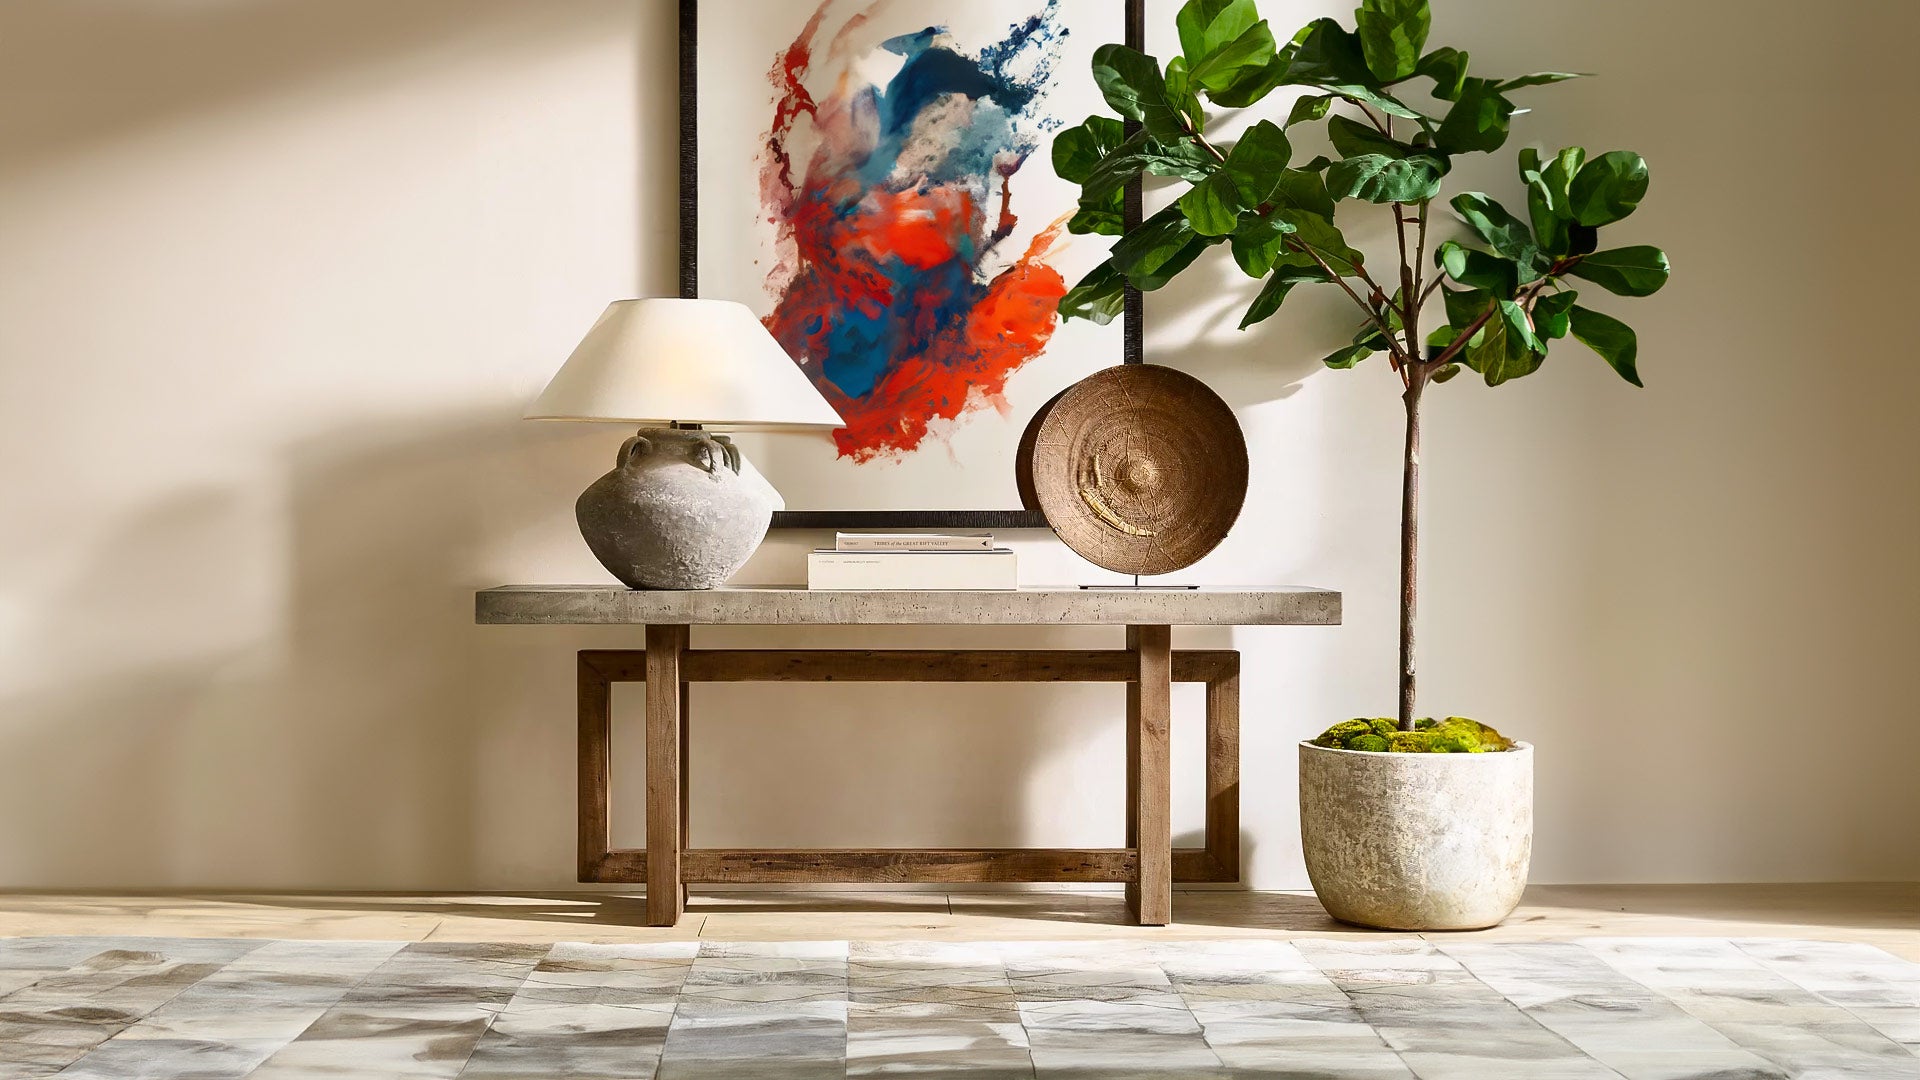 The Stylish Console Table: A Focal Point for Your Entryway